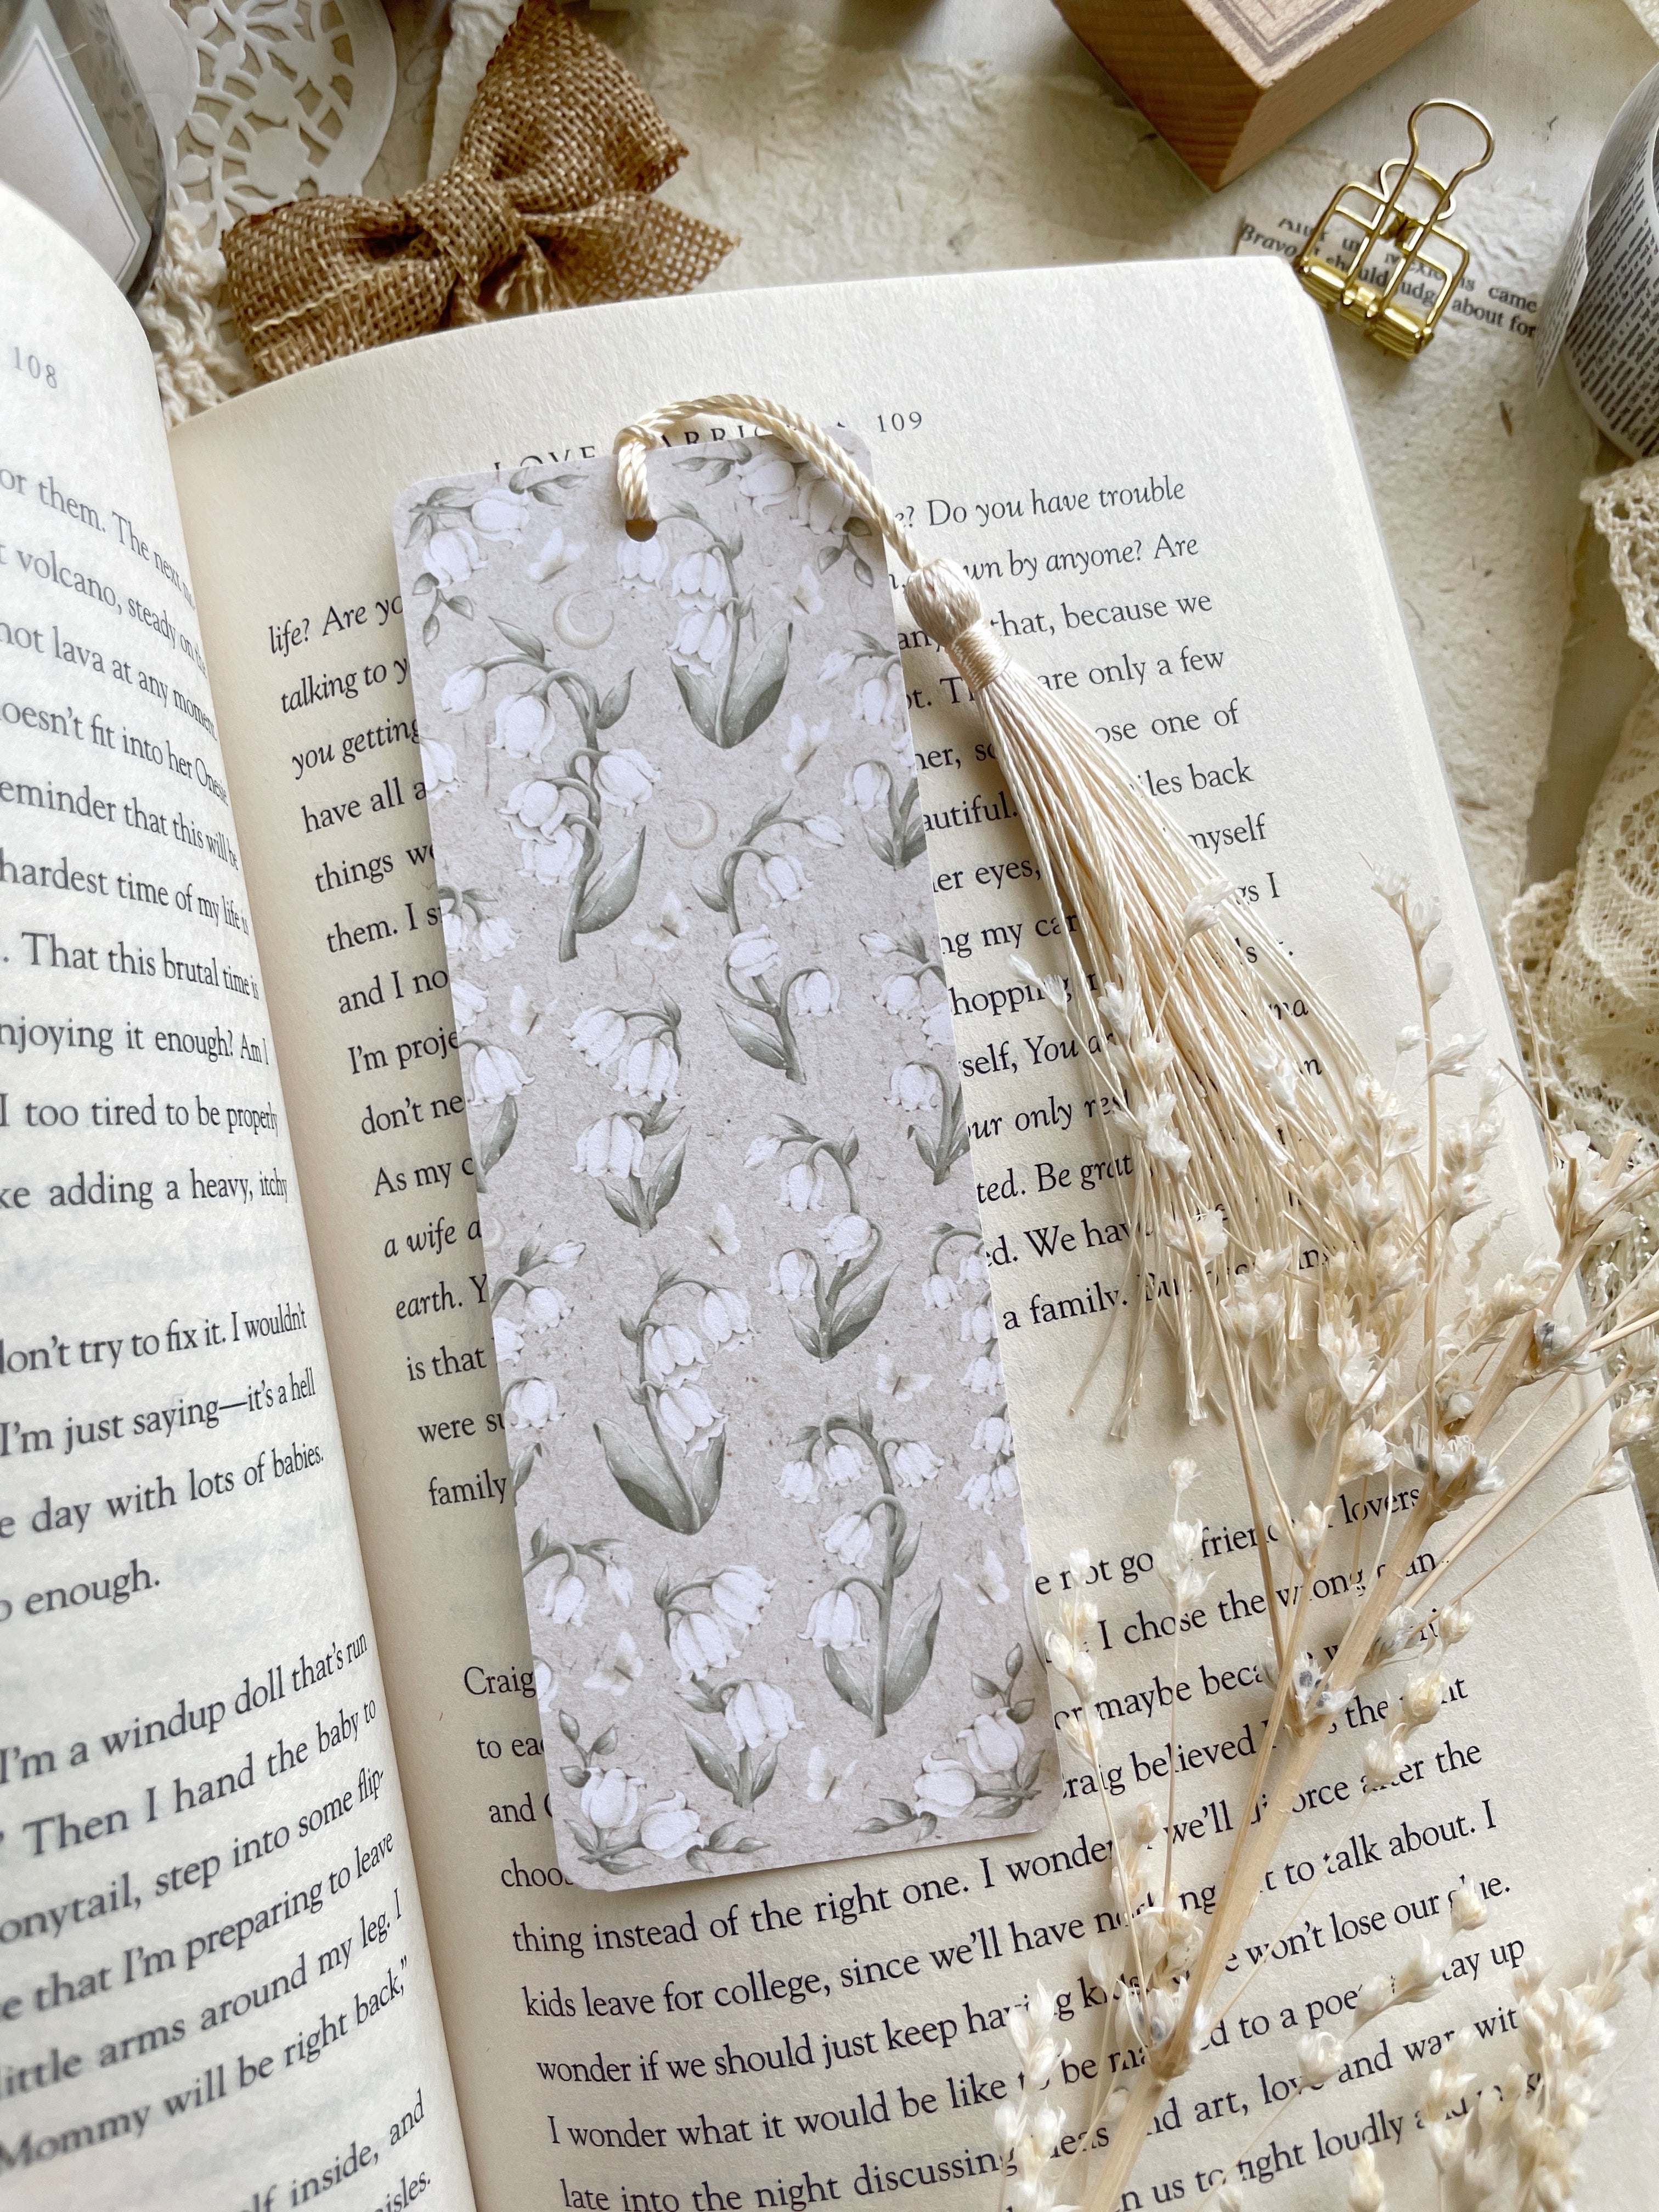 Jual lily of the valley coquette beads bookmark ‎♡₊˚ ・₊✧, penanda buku